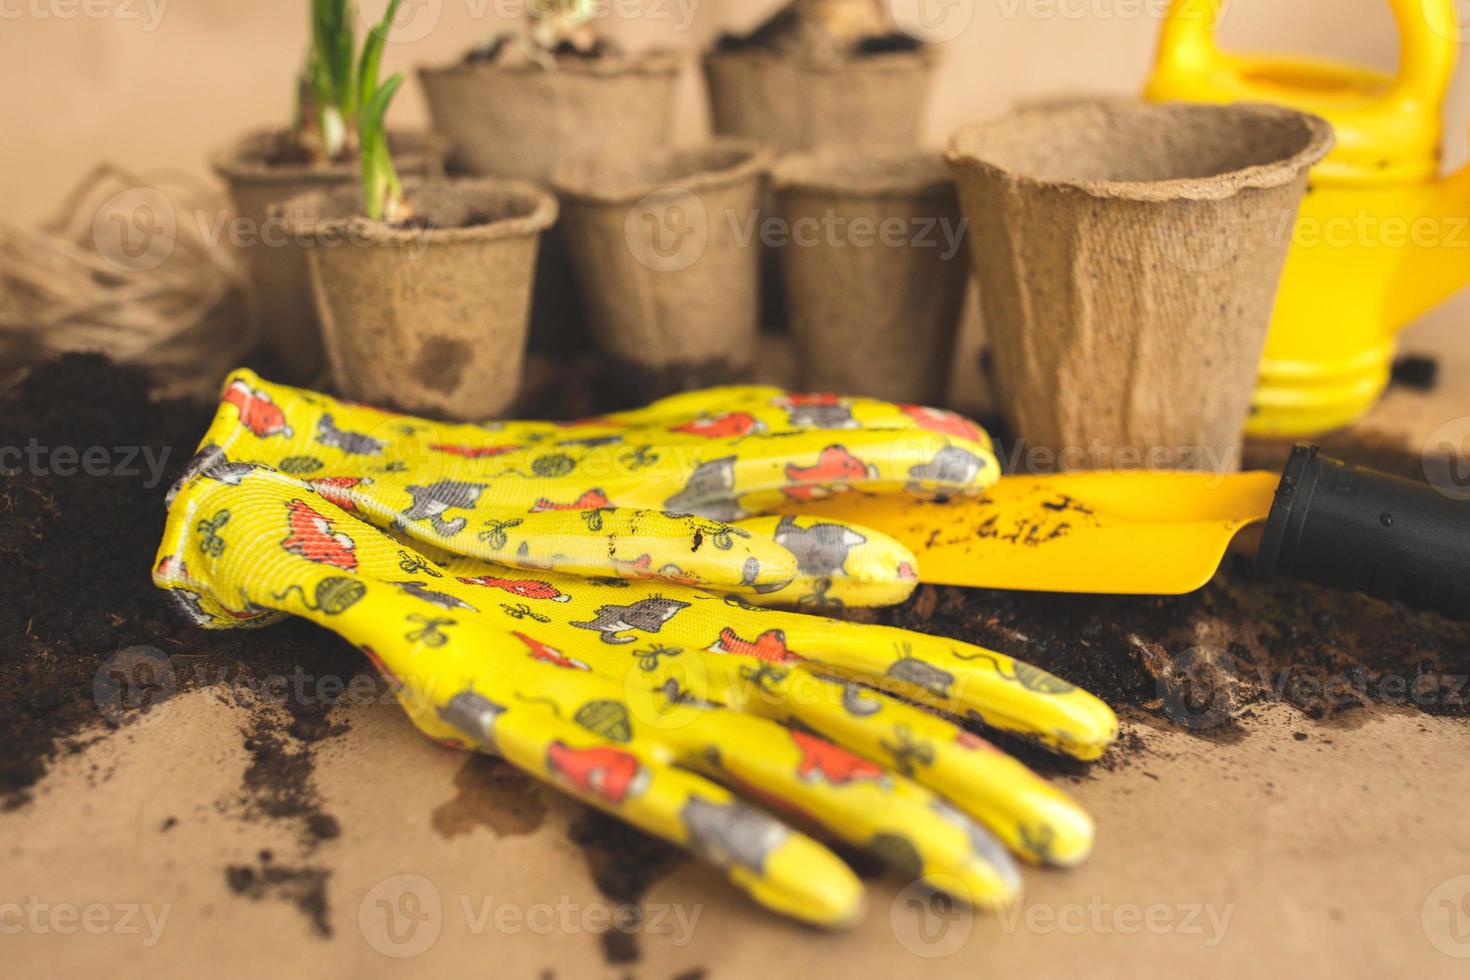 gardening composition with yellow flowers and gardening tools, seedlings and crops, baby's plants,gardening gloves, potting soil, bulbous seed, jonquil. Place for text, banner. Illuminating photo